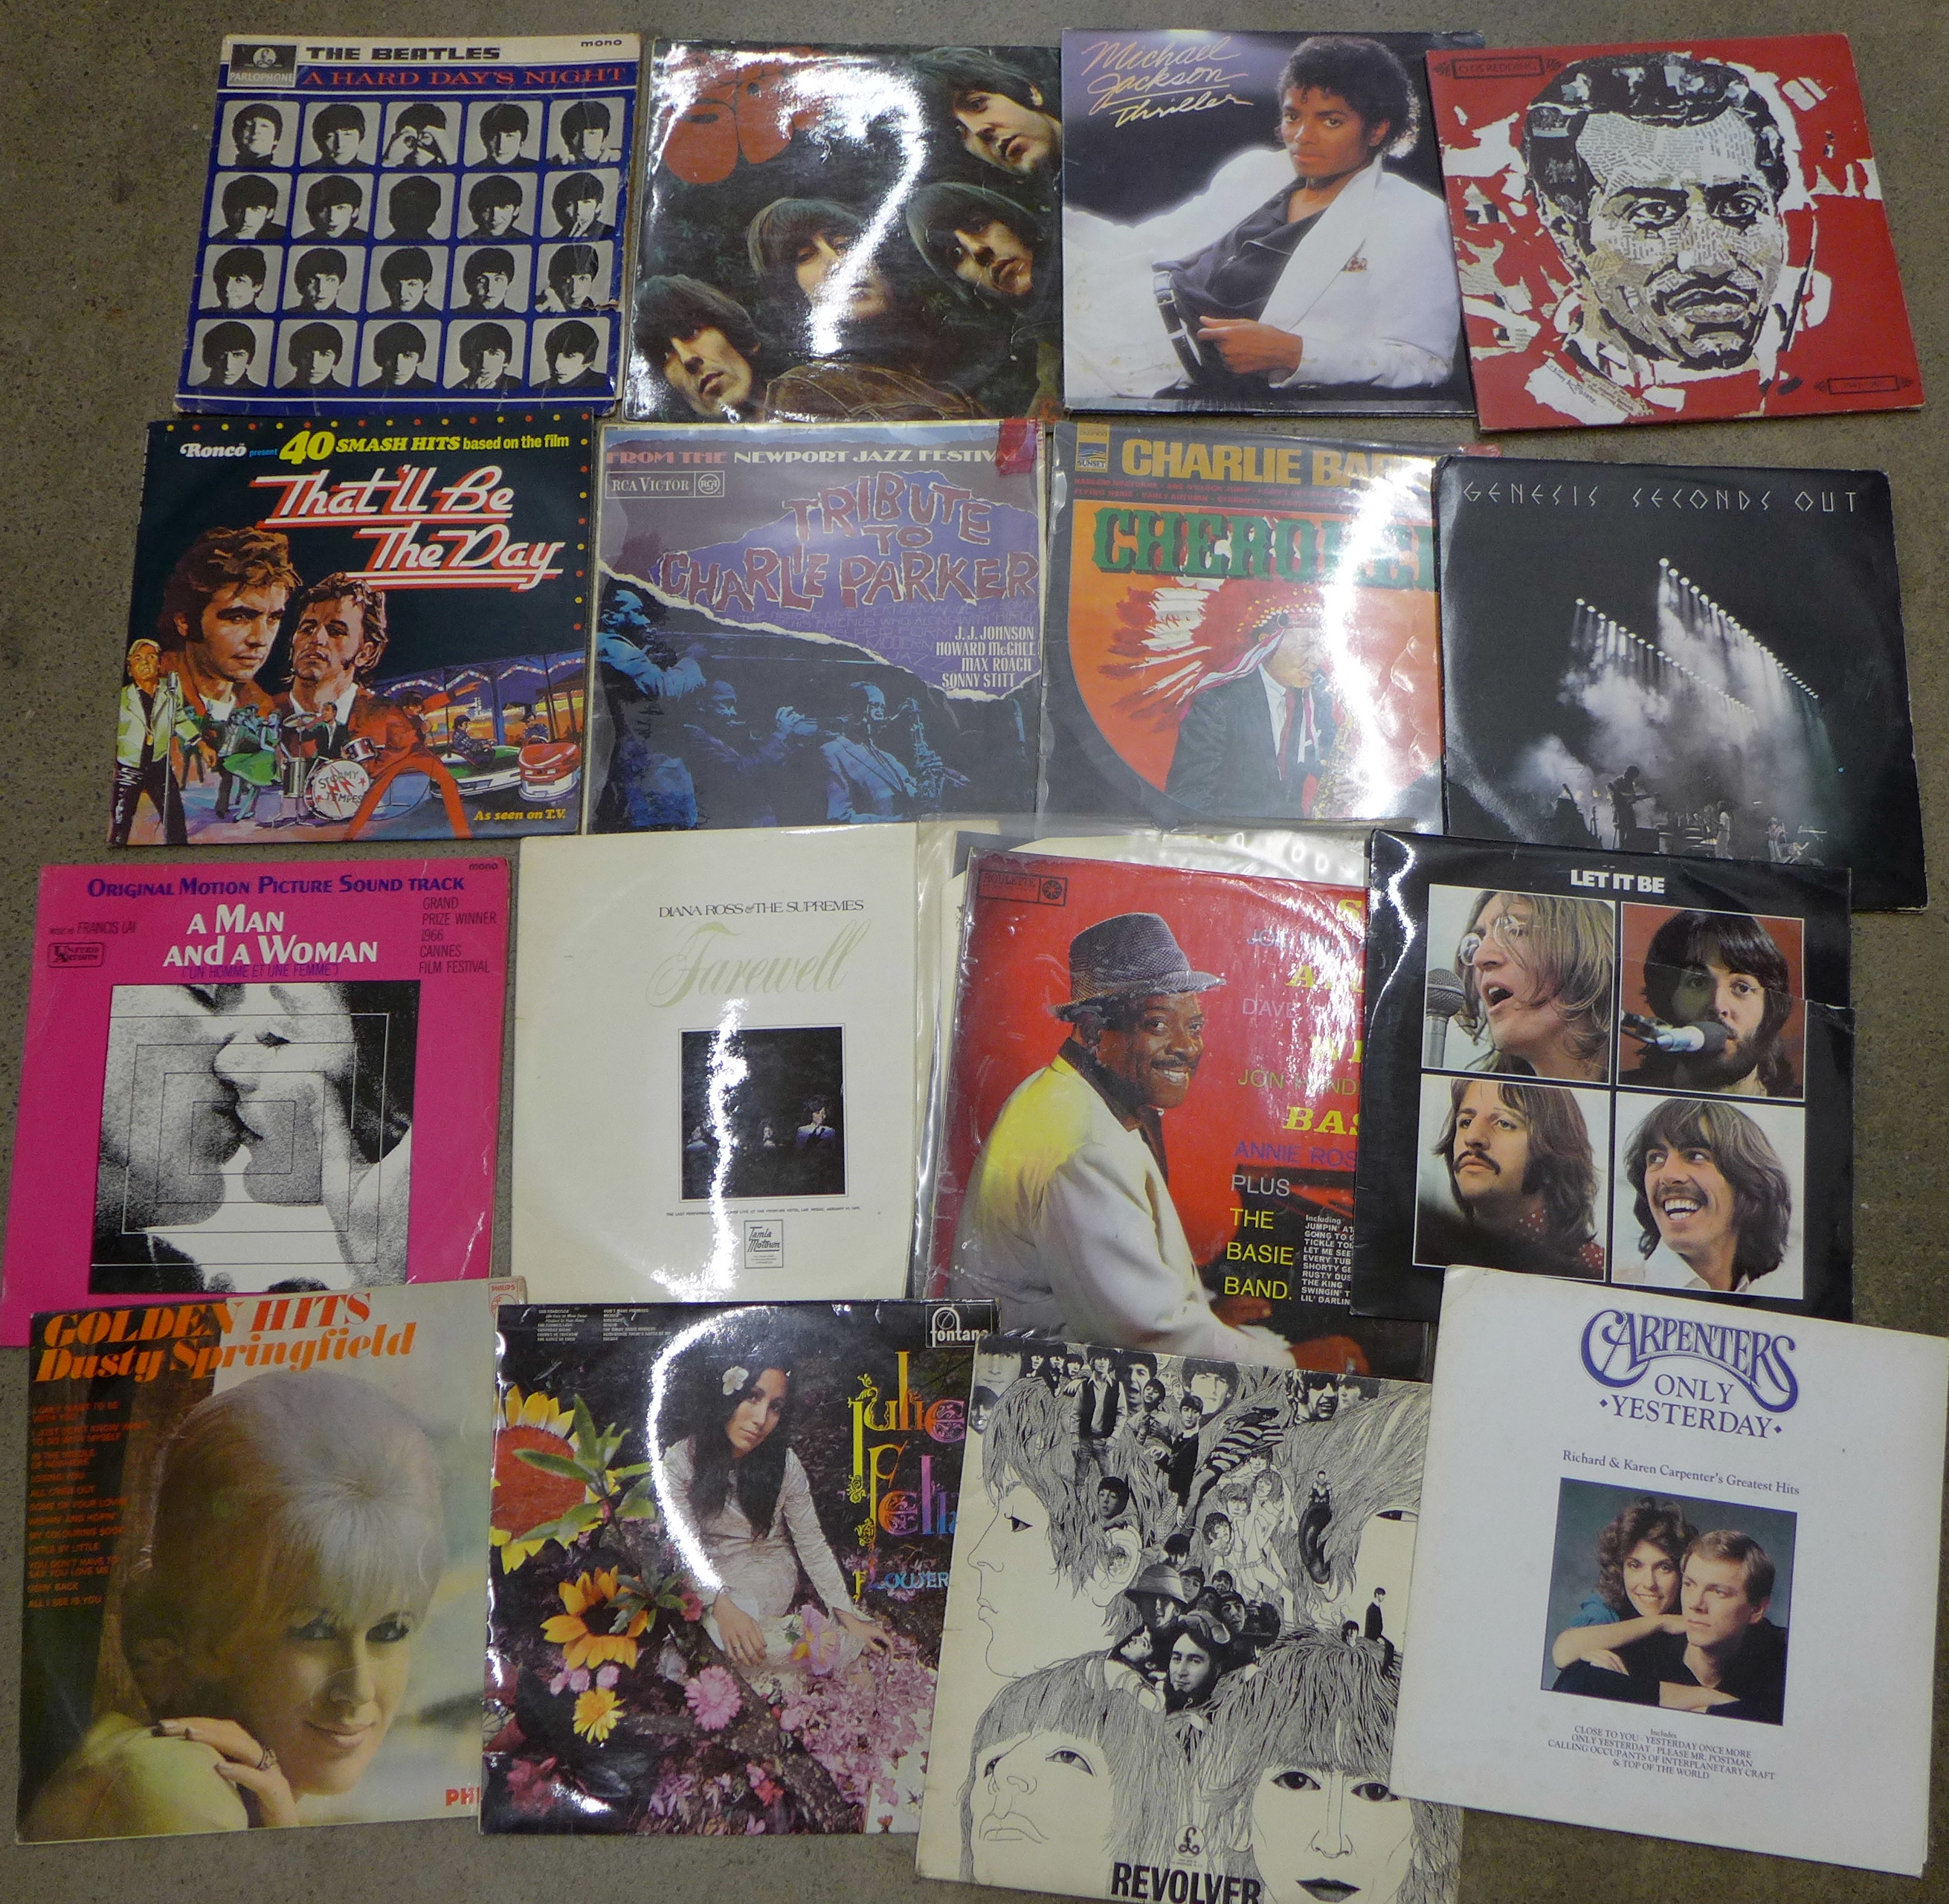 Thirty-two LP records, including The Beatles, Genesis, Diana Ross, etc.